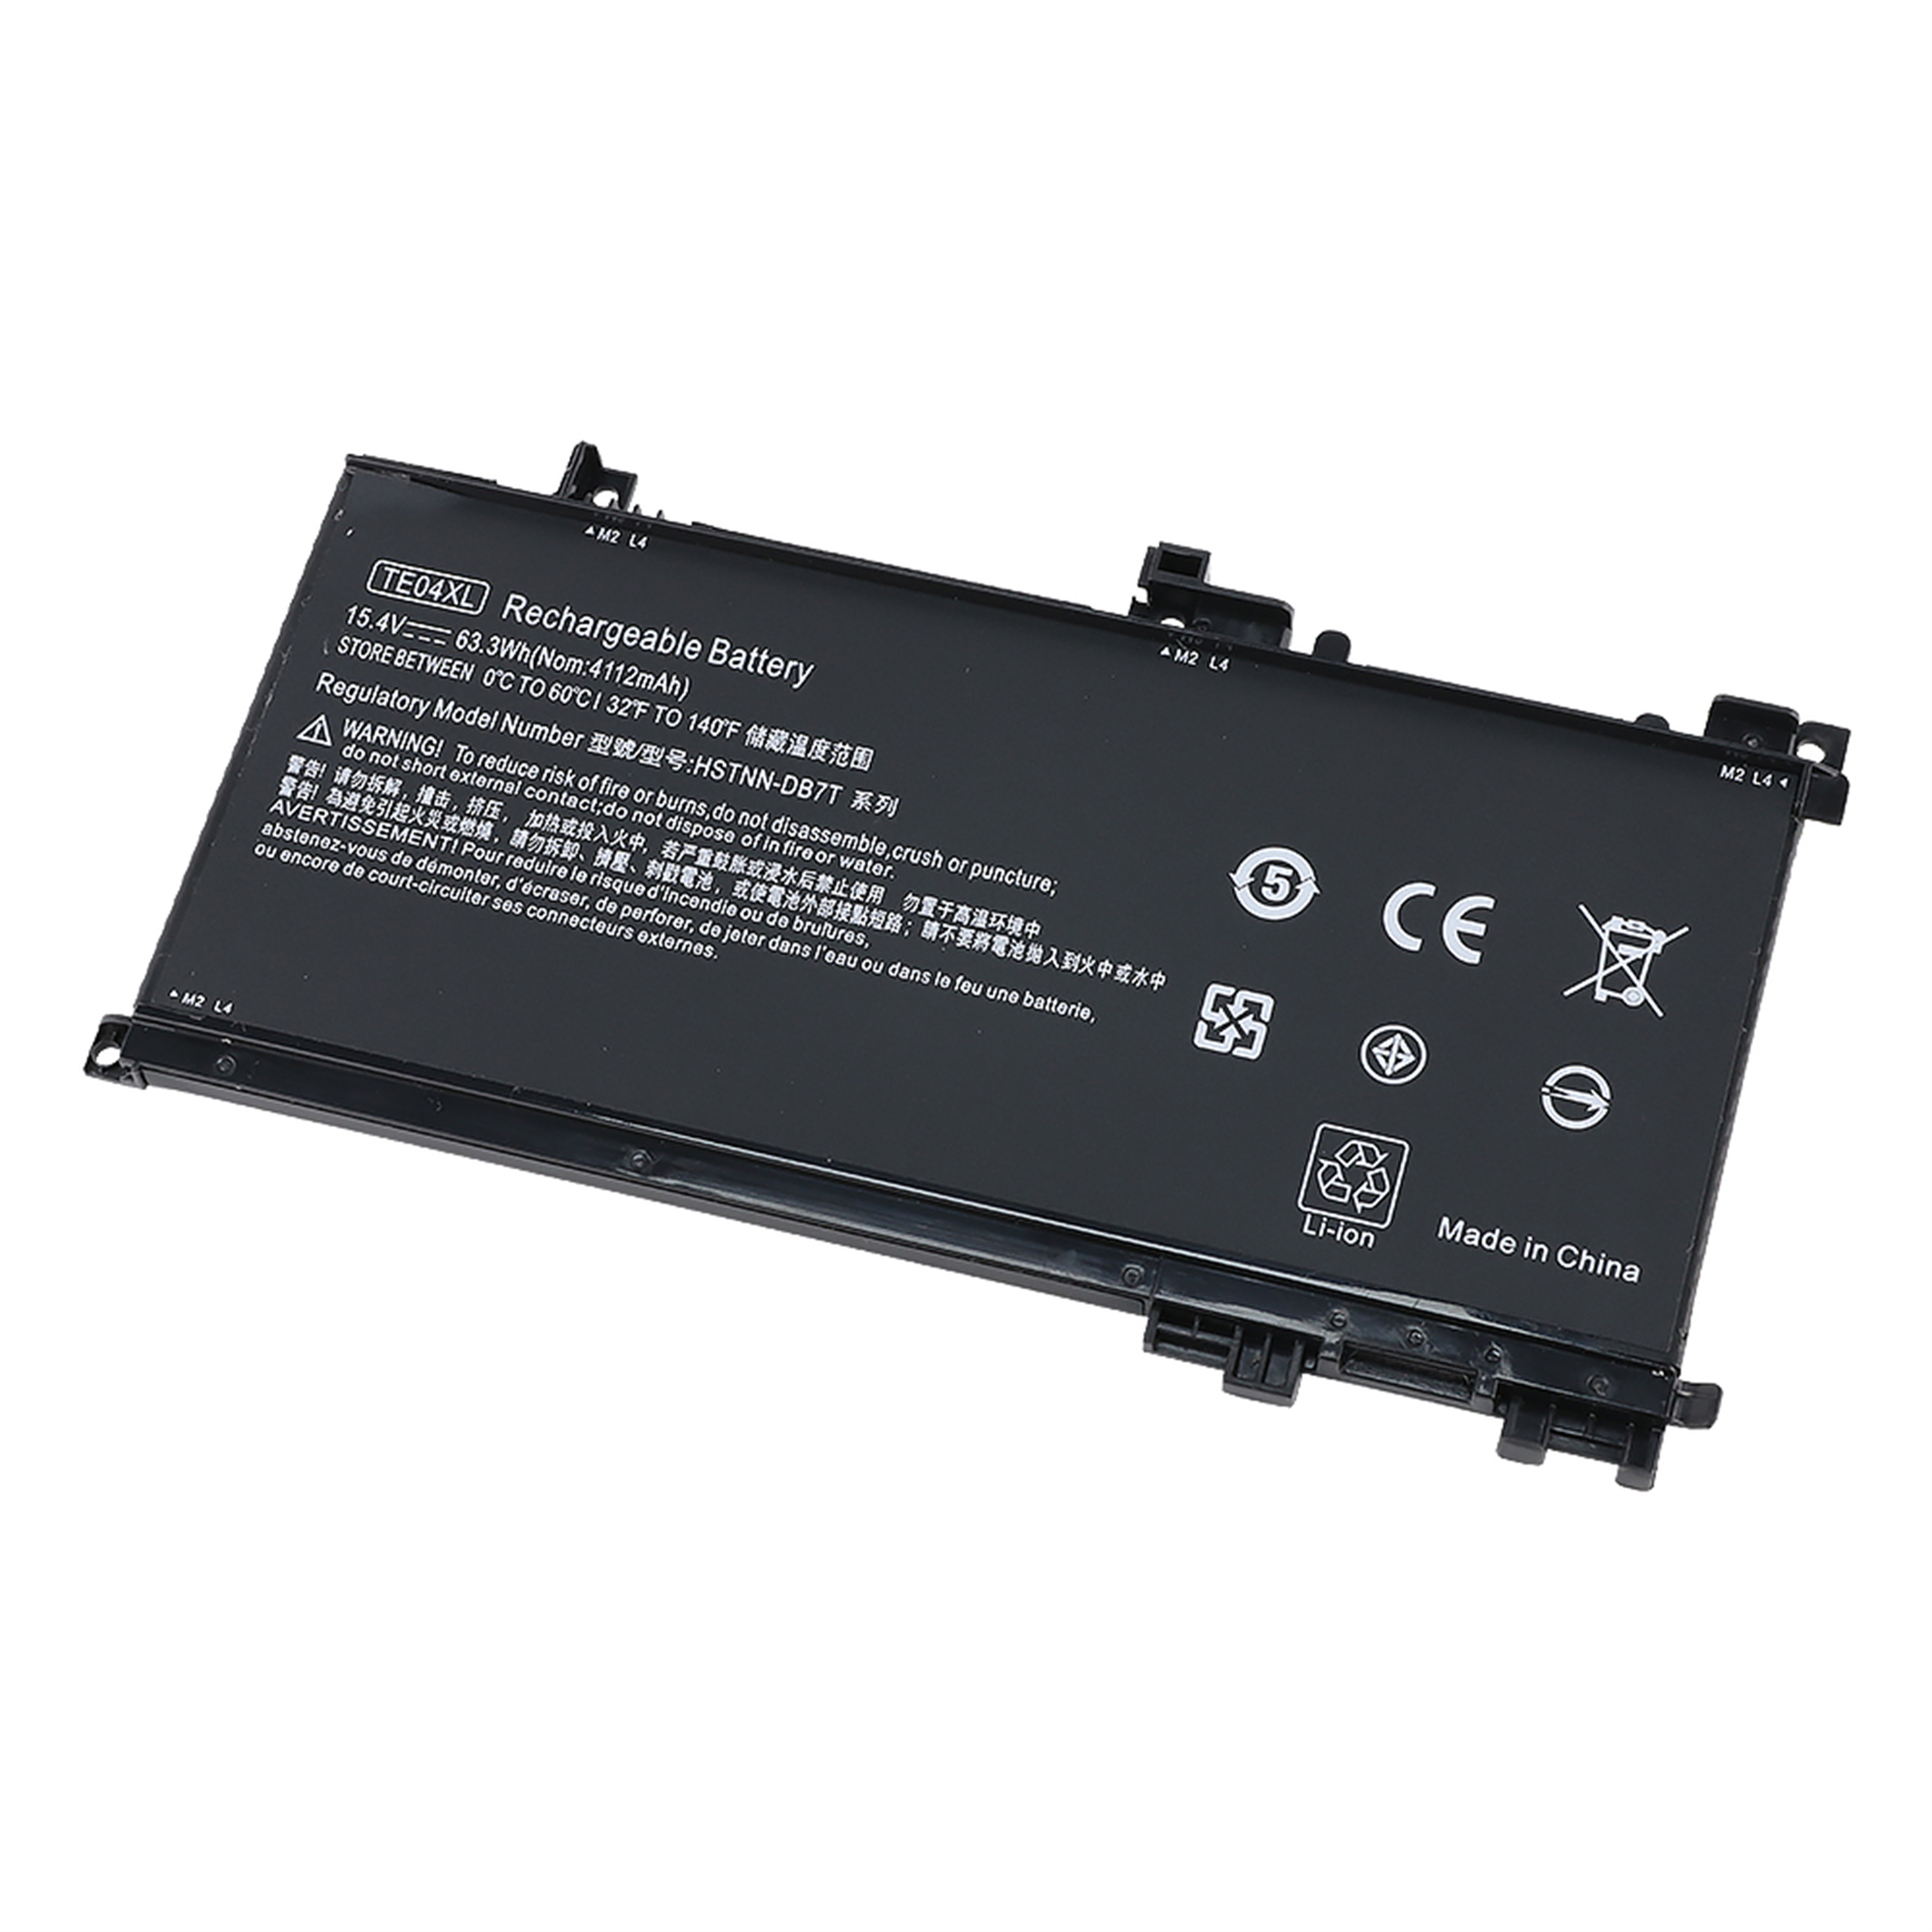 TE04XL rechargeable lithium ion Notebook battery Laptop battery For Hp OMEN 15-AX 15-AX033DX AX020TX BC219TX 905277-555 HSTNN-UB7A TPN-Q173 系列 REPLACEMENT BATTERY PN:TE04XL 905175-271 905175-2C1